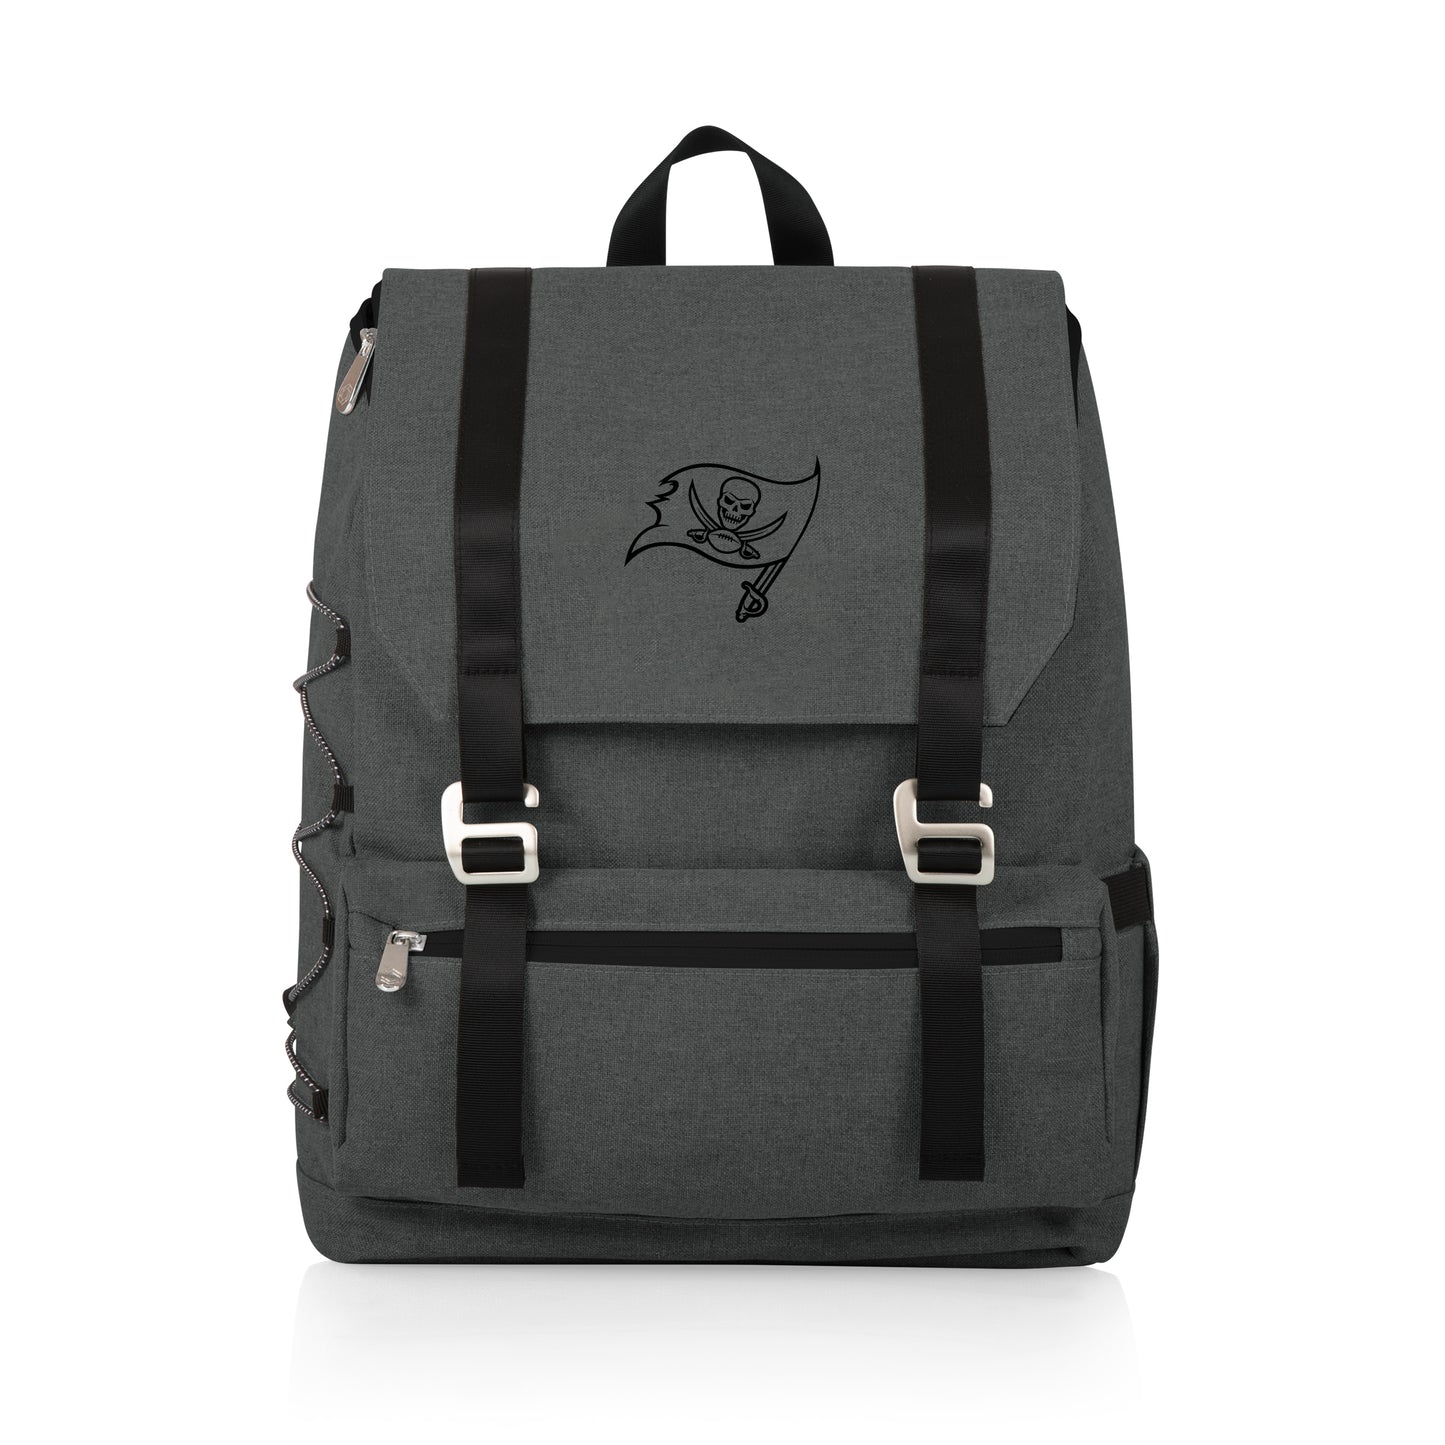 Tampa Bay Buccaneers - On The Go Traverse Cooler Backpack